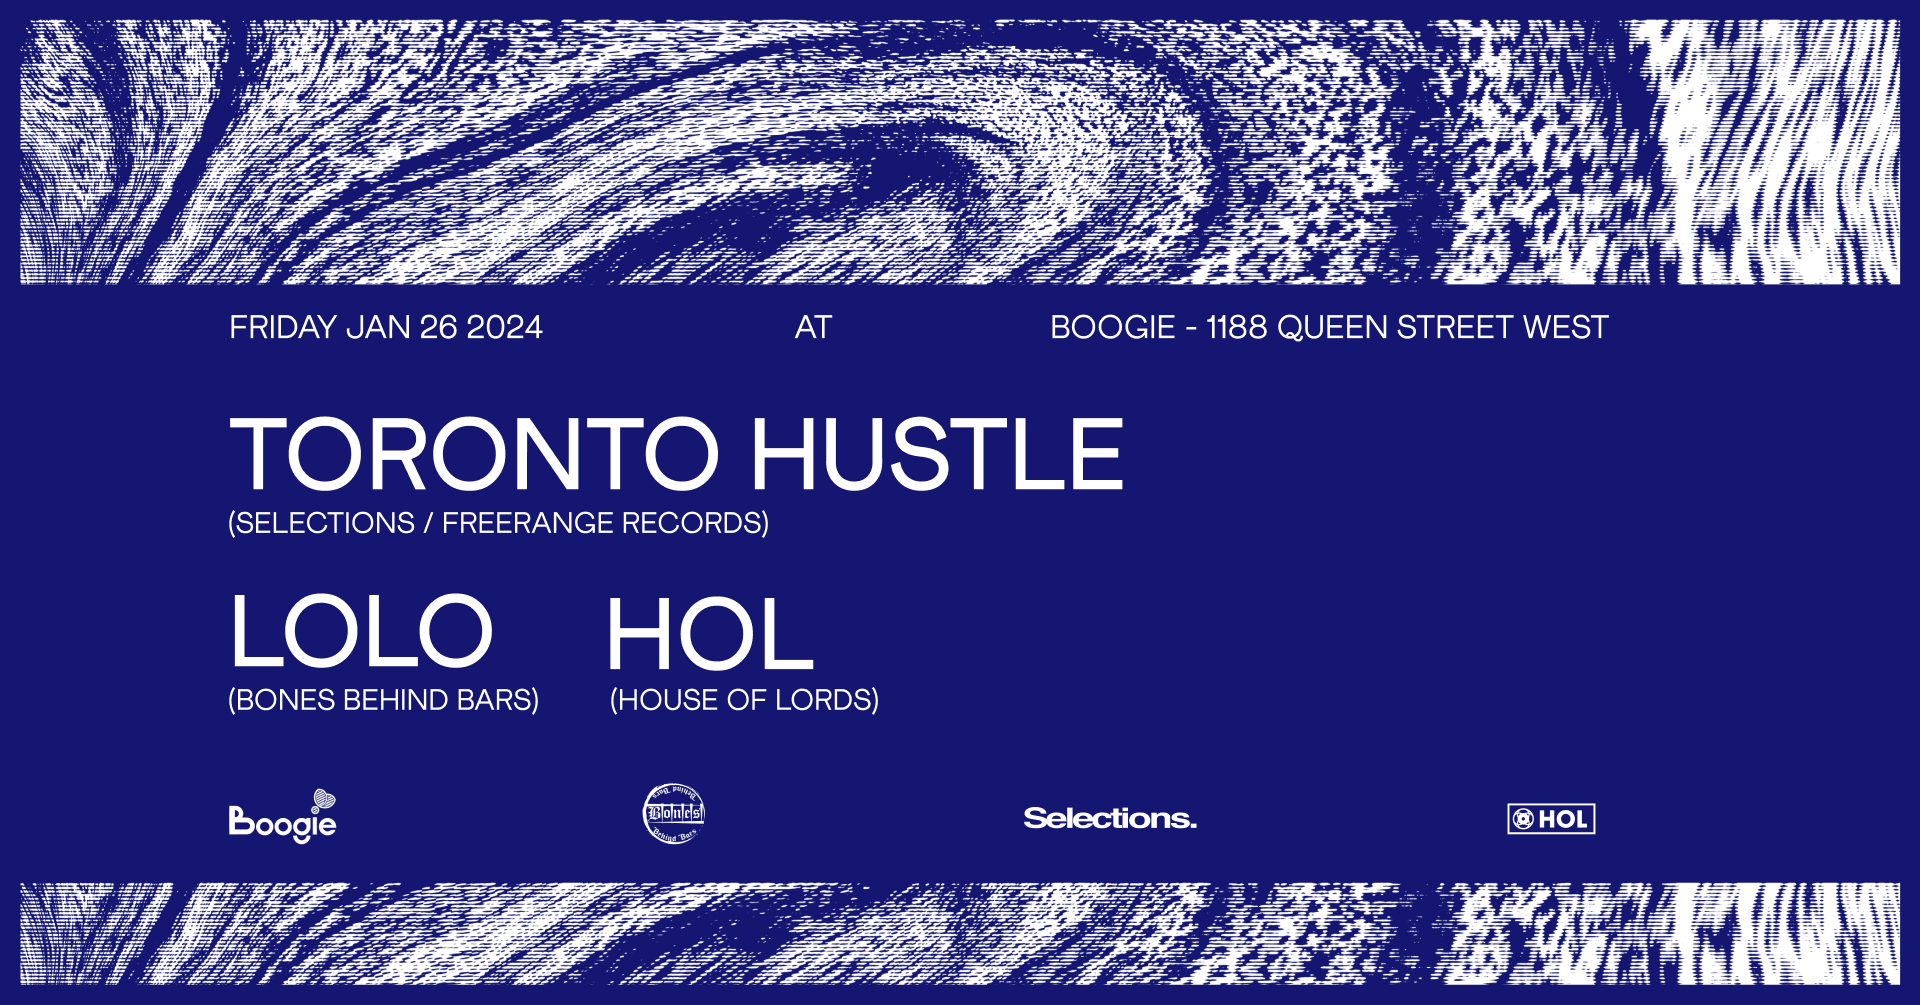 Toronto Hustle, Lolo, House of Lords at Boogie - Página frontal